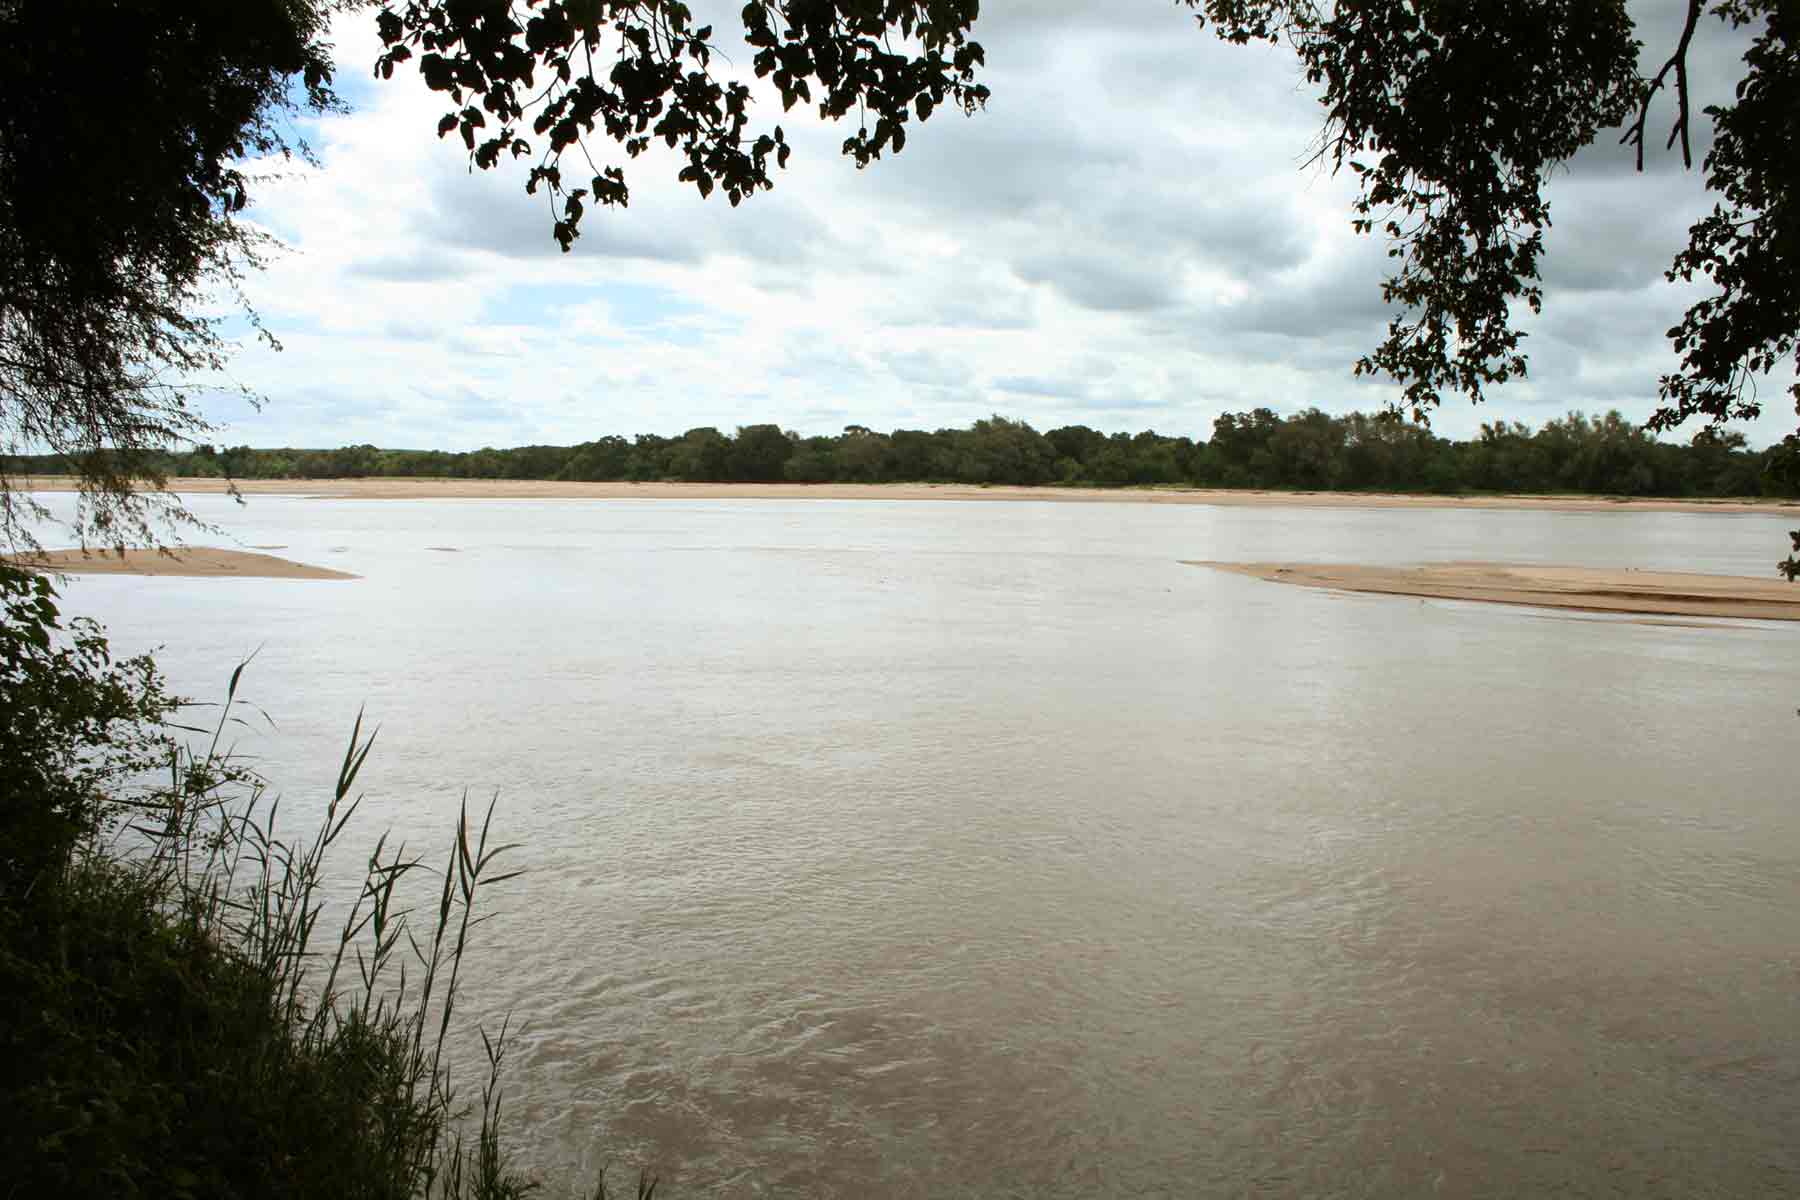 Shashe River in flood; a rare sight in this normally dry environment.